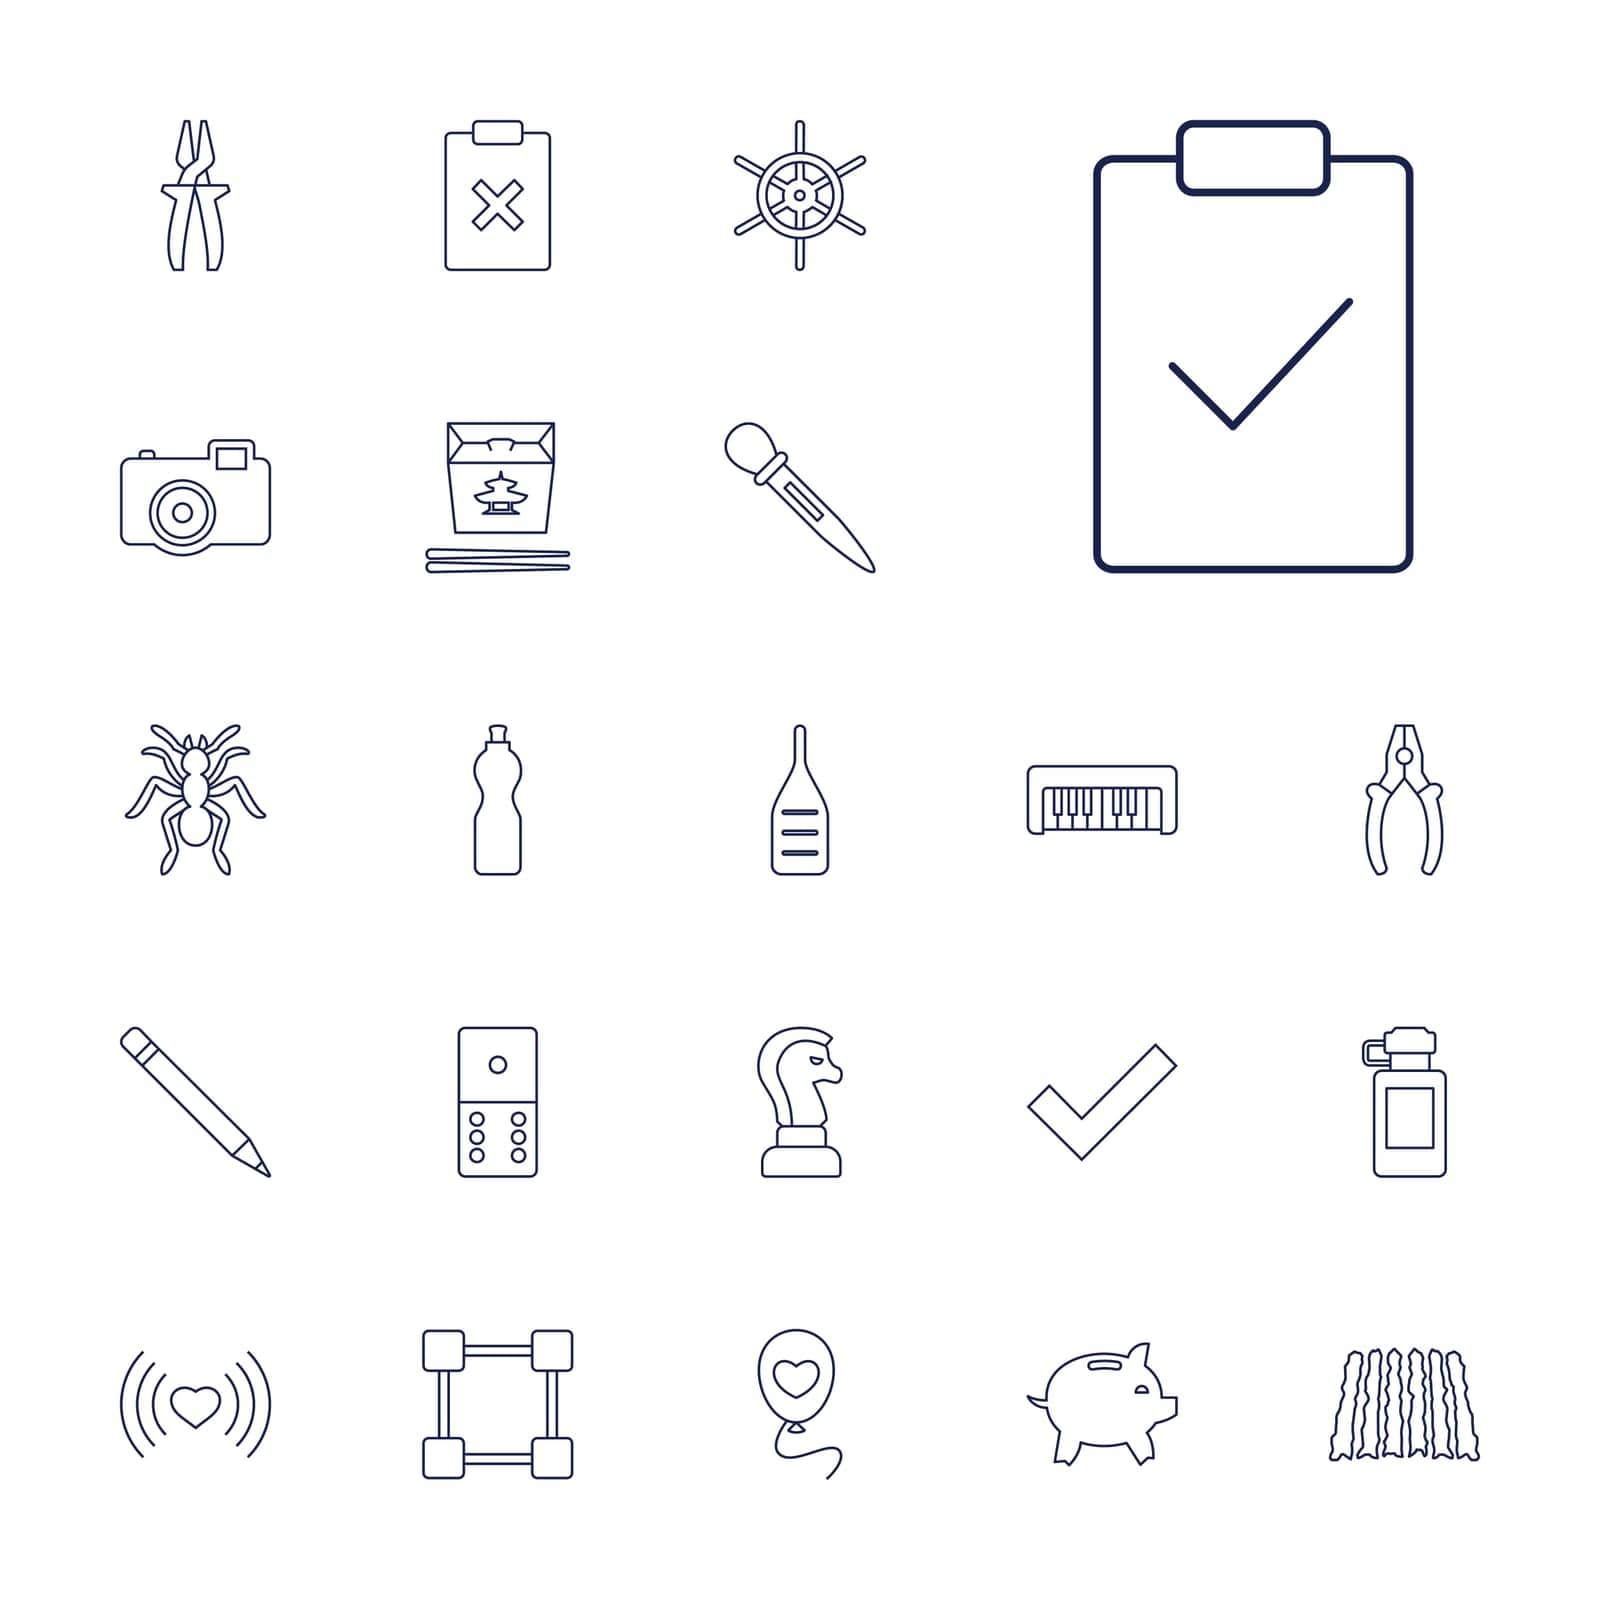 symbol,shadow,balloons,icon,sign,for,box,bottle,clipboard,helm,network,chinese,piano,sawing,fitness,design,pen,pliers,connection,vector,domino,camera,toy,chess,set,nail,ant,cross,tick,food,heart,horse,with,fast,field,money,background,illustration